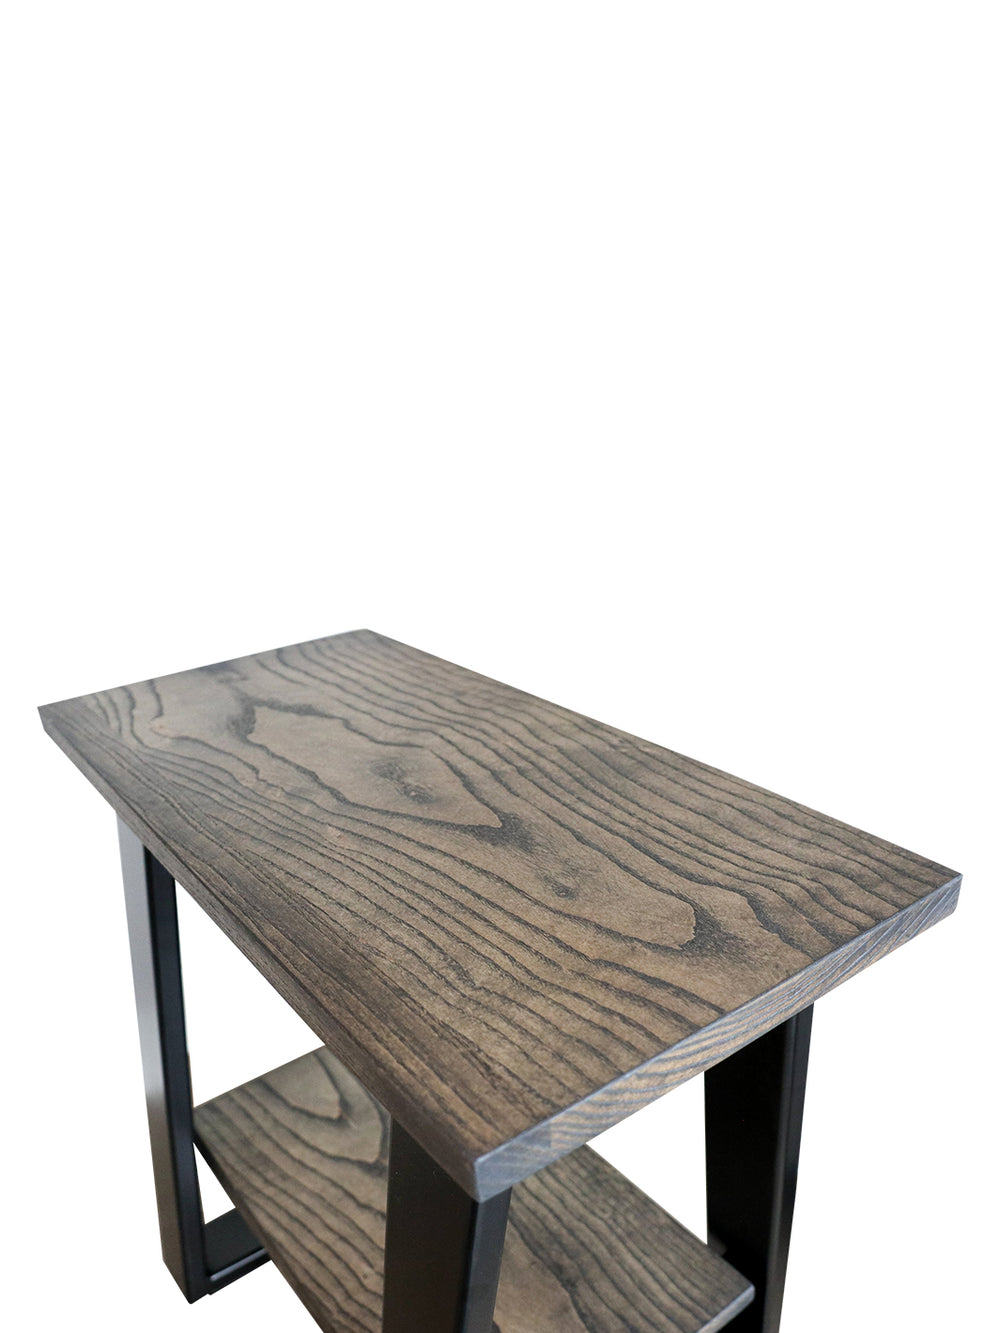 Tapered Industrial Wood & Metal Side Table Earthly Comfort Side Tables 1569-1